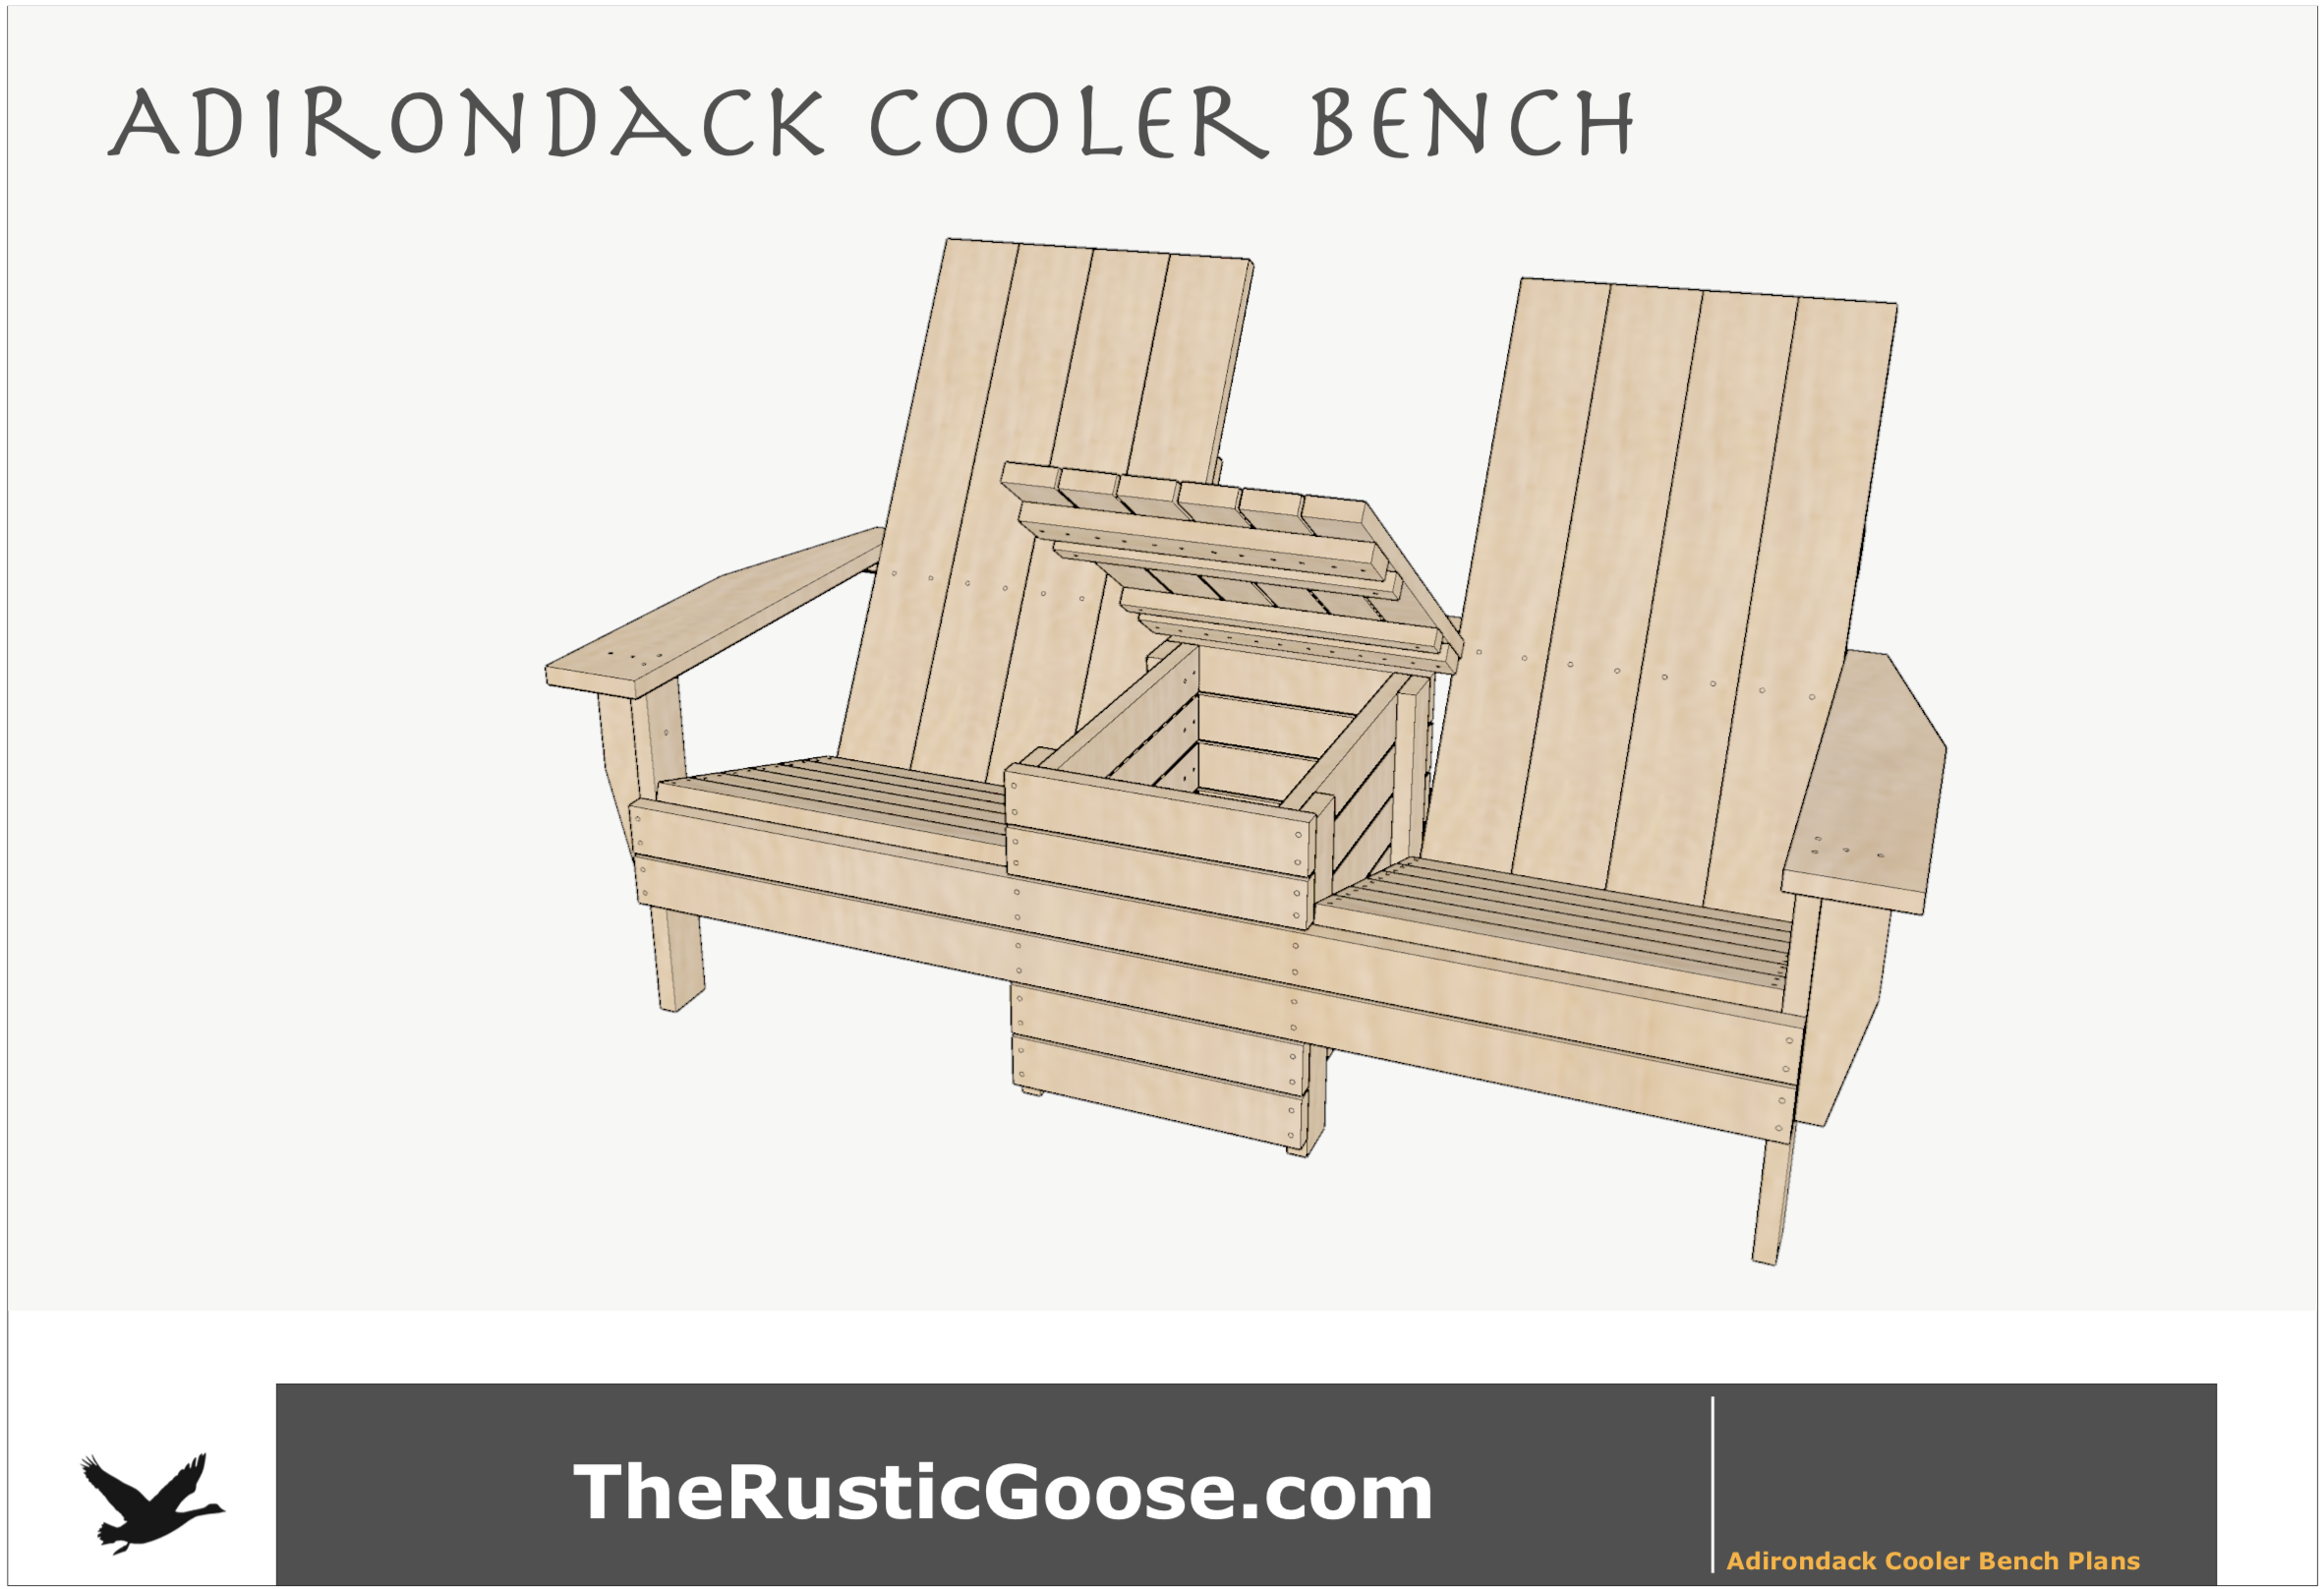 Adirondack Cooler Bench Plans — The Rustic Goose